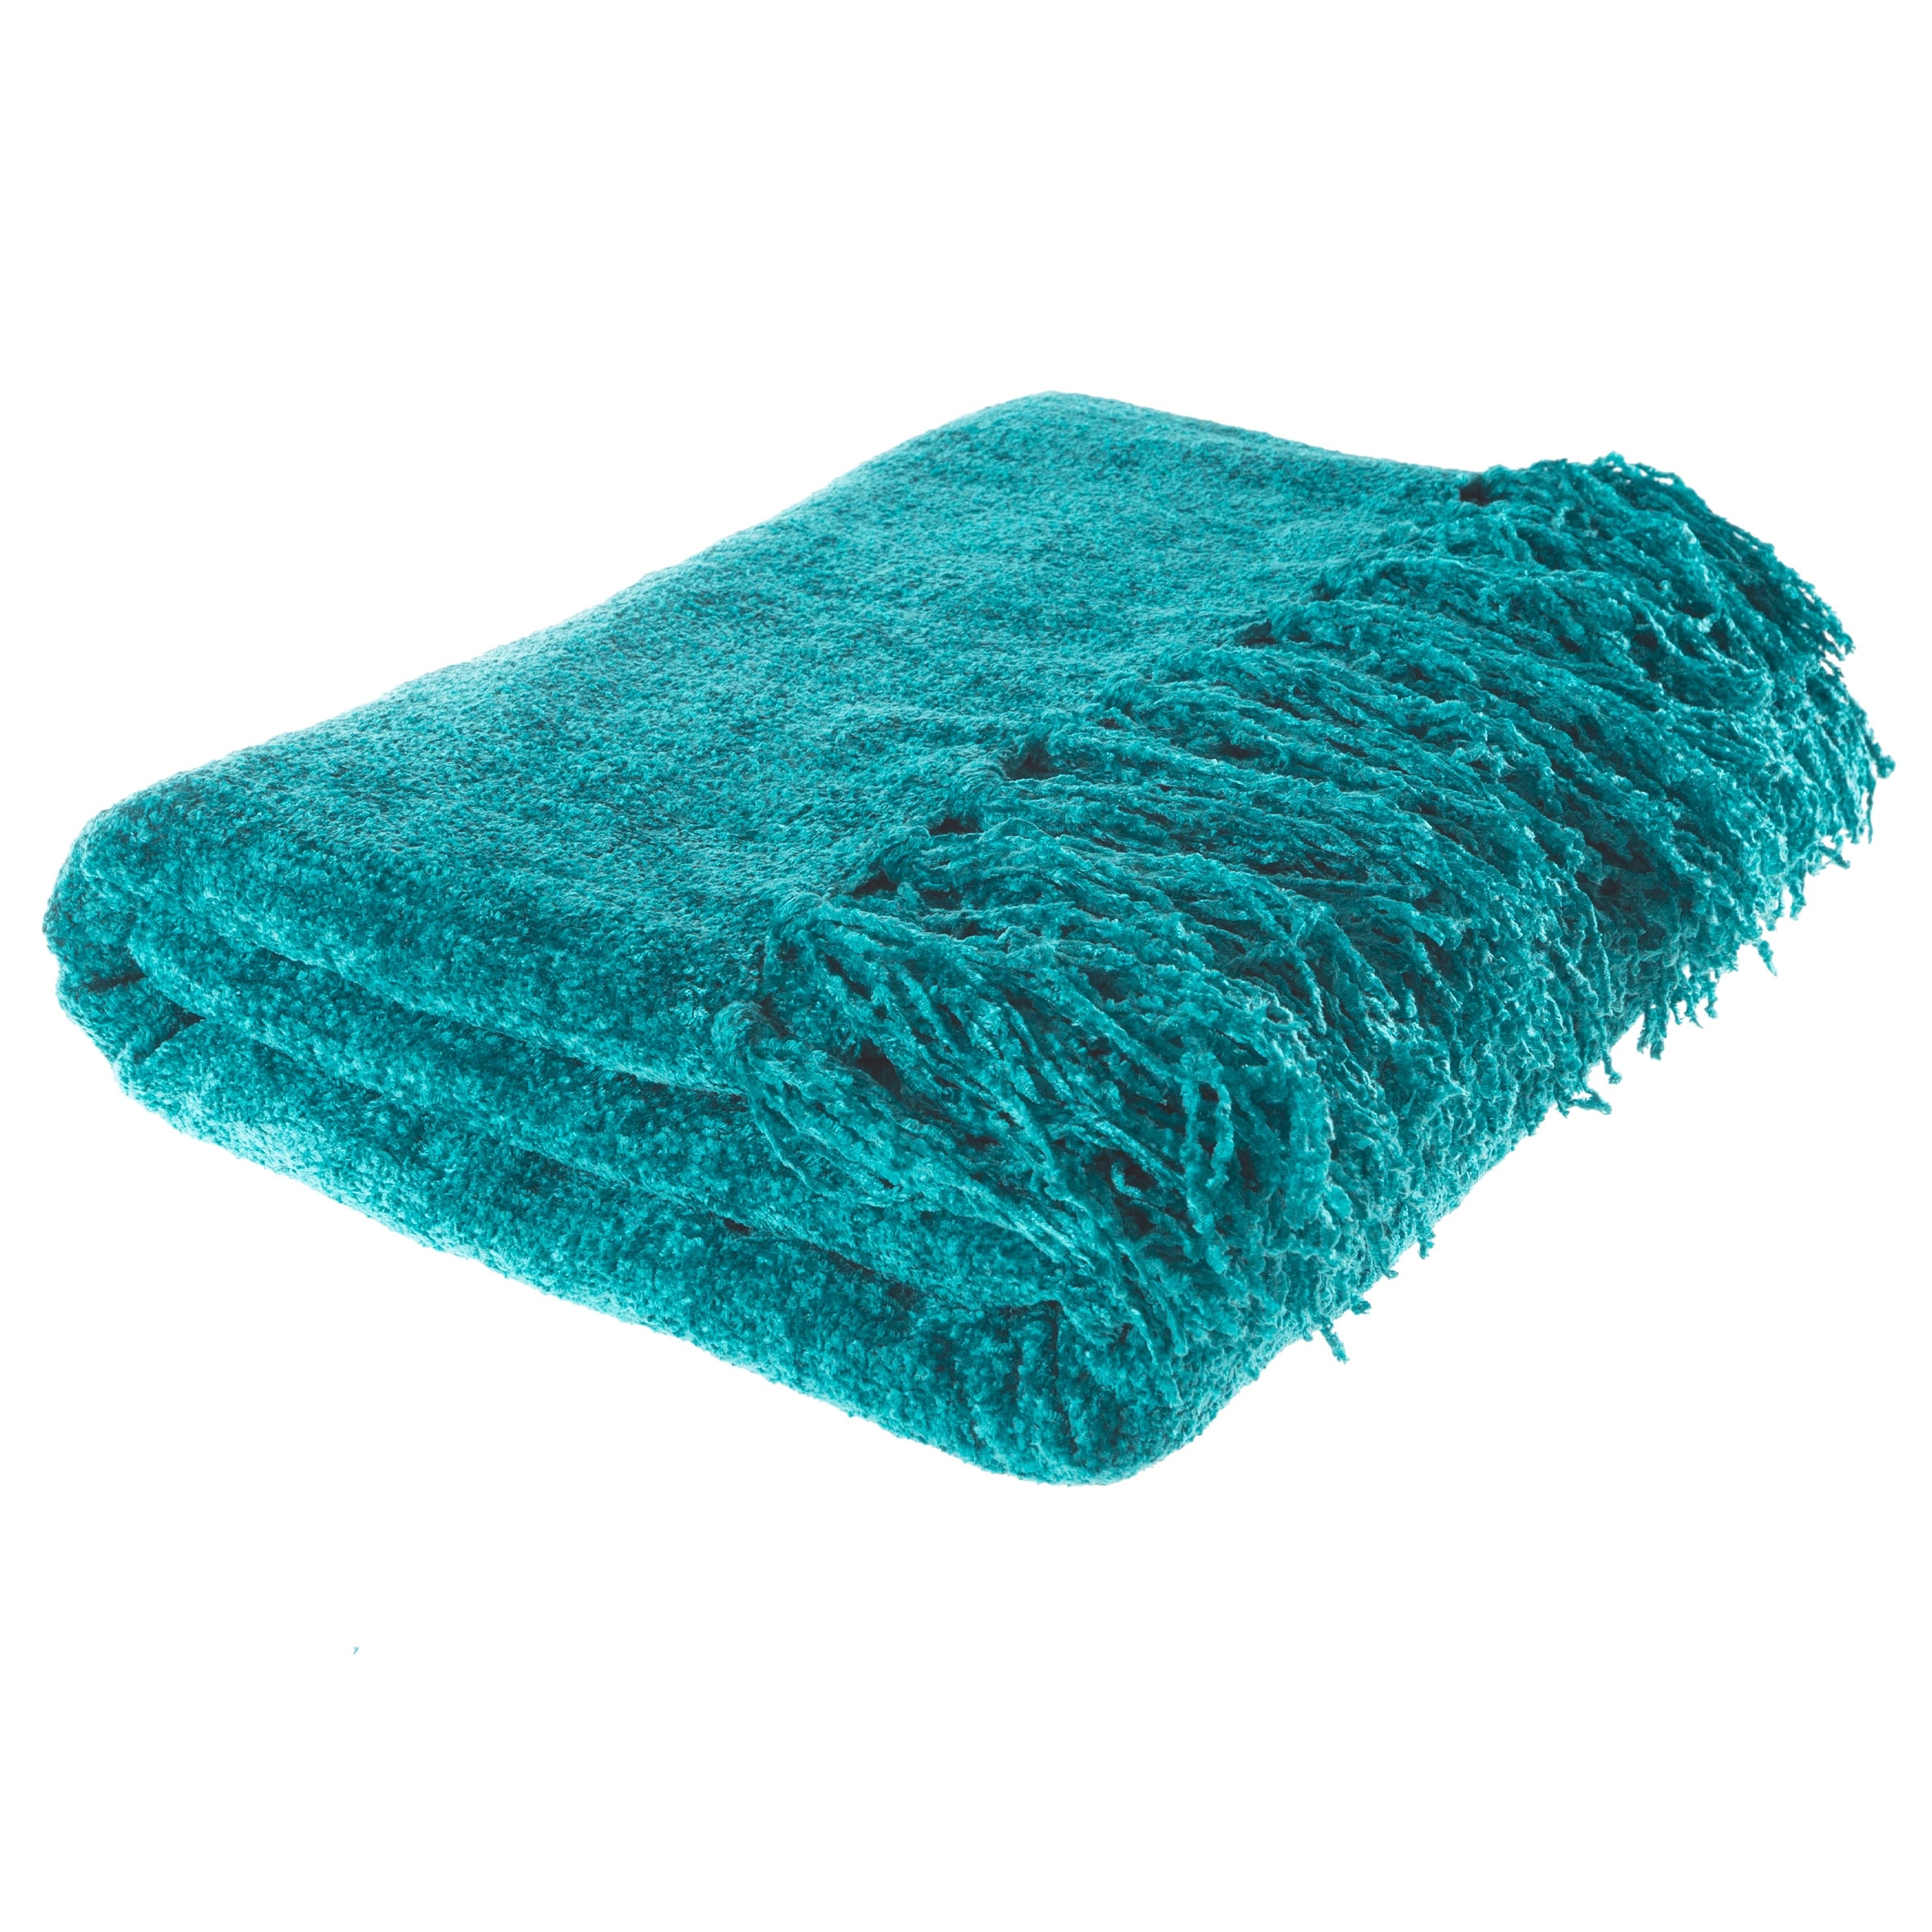 https://ak1.ostkcdn.com/images/products/is/images/direct/b03ac26b747f2efb5528c00d9eaa86ae04f1d767/Oversized-Chenille-Throw-Blanket-by-LHC.jpg